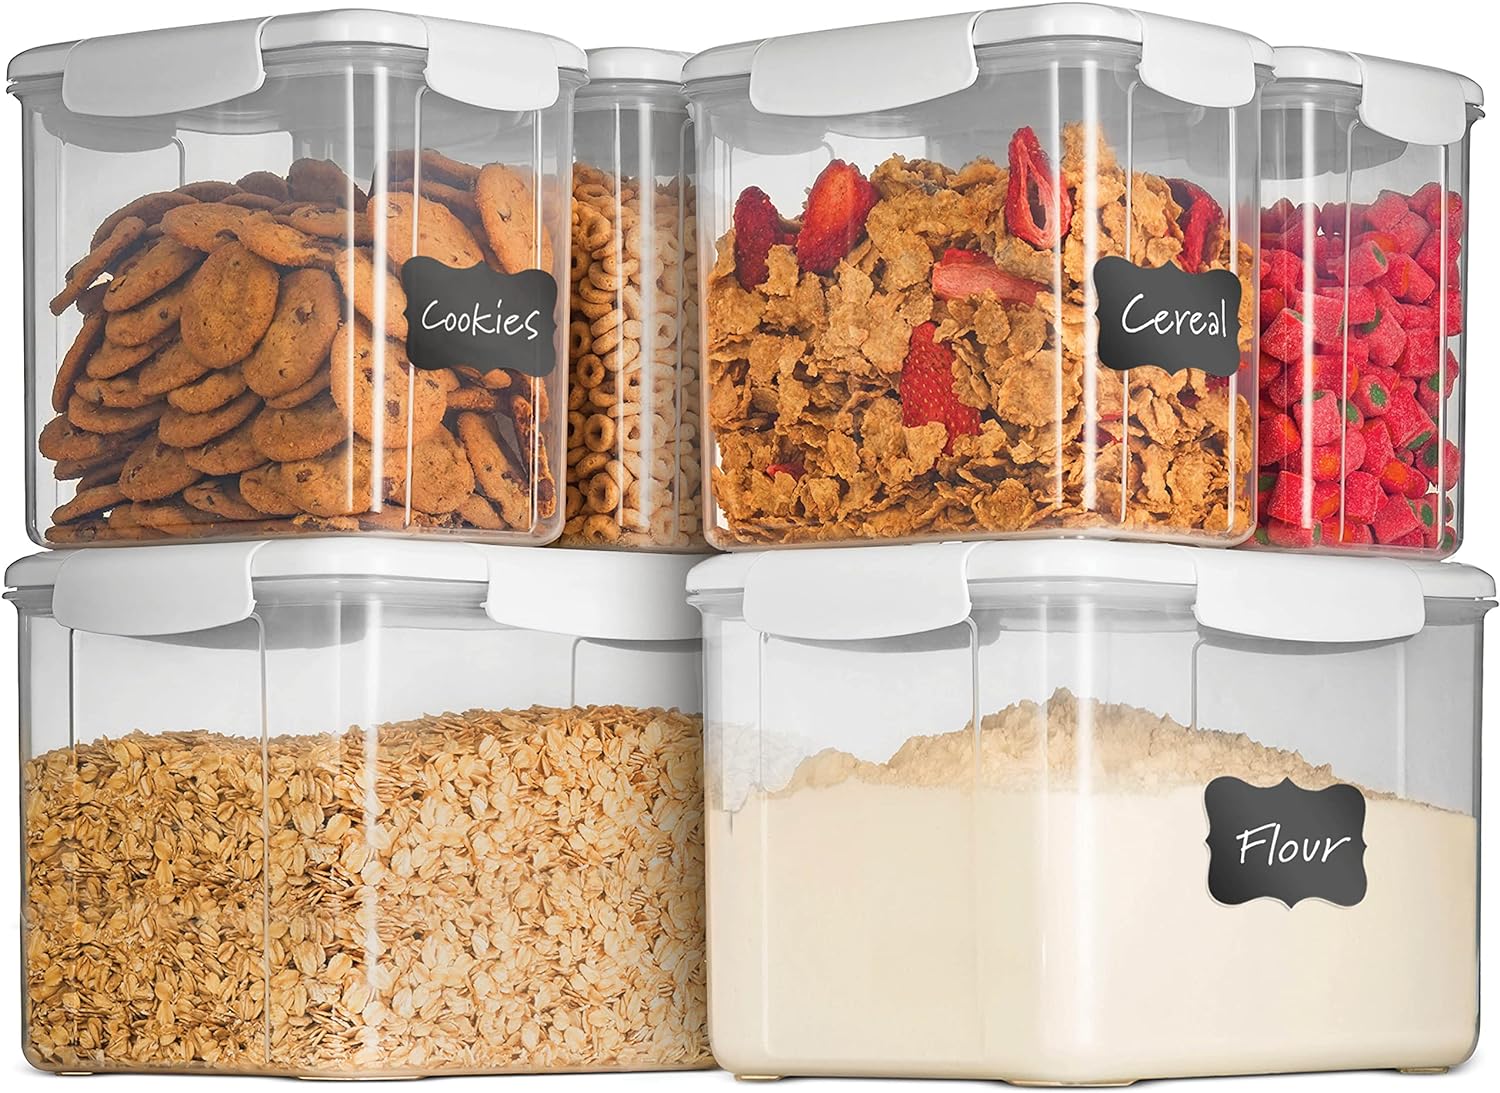 FineDine Airtight Food Storage Container Sets for Kitchen Pantry Organization and Storage - 12-Piece Set with Lids for Flour, Sugar, Cereal, and More (White)